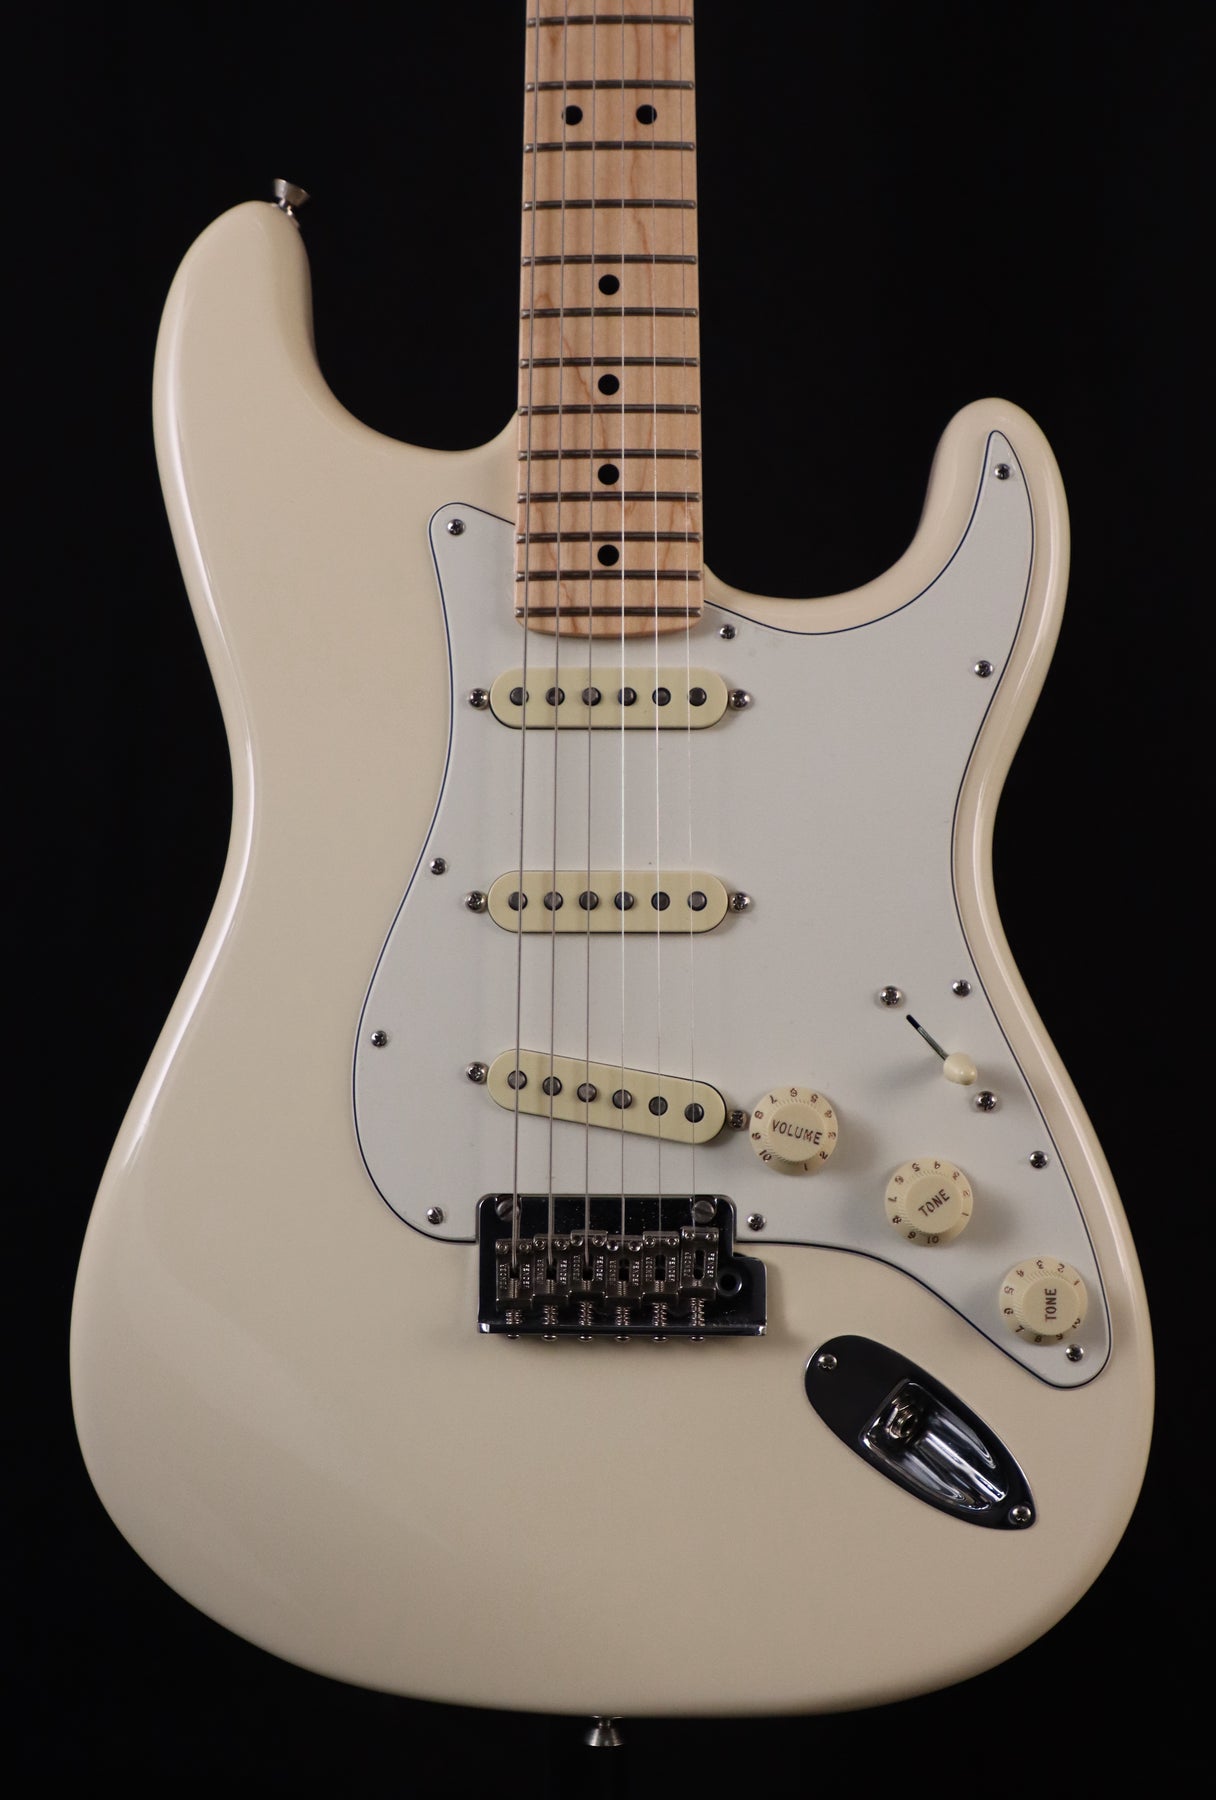 Fender Stratocaster – Jimmy Wallace Guitars